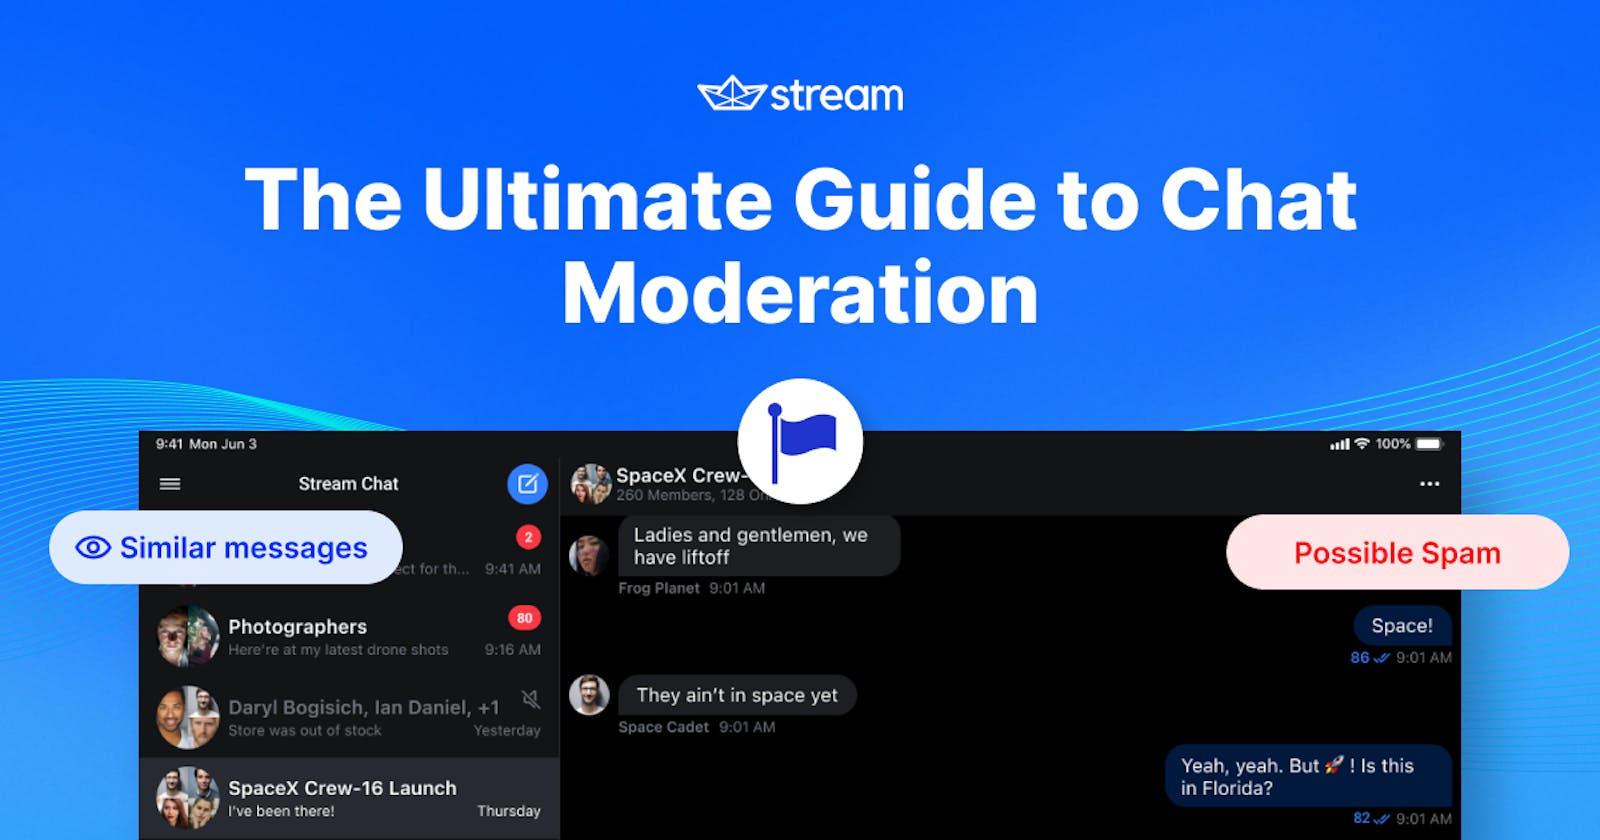 The Ultimate Guide to Chat Moderation